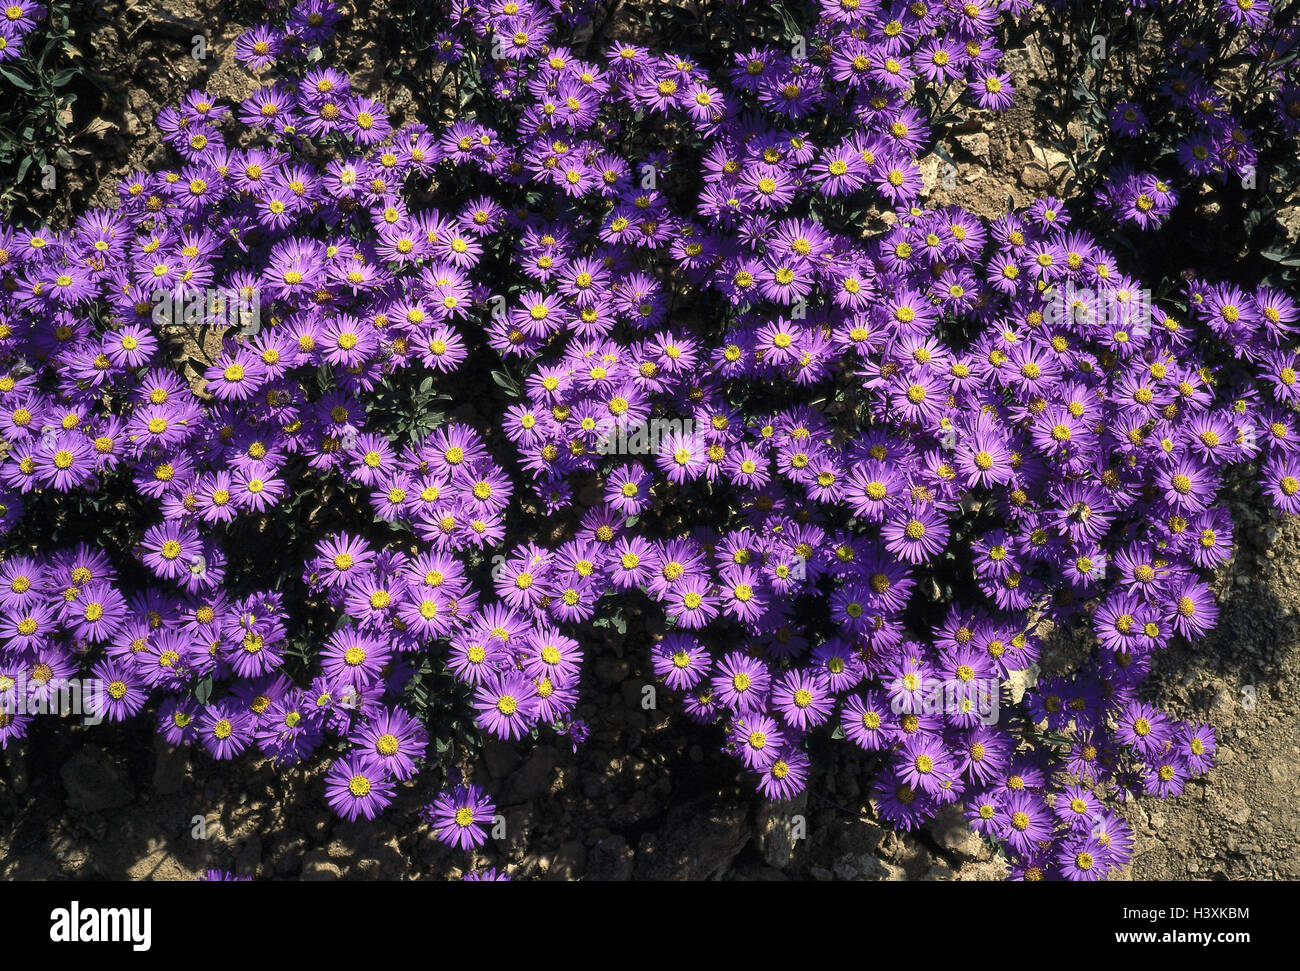 Autumn asters, aster amellus aster, asters, autumn aster, shrub aster, Stock Photo